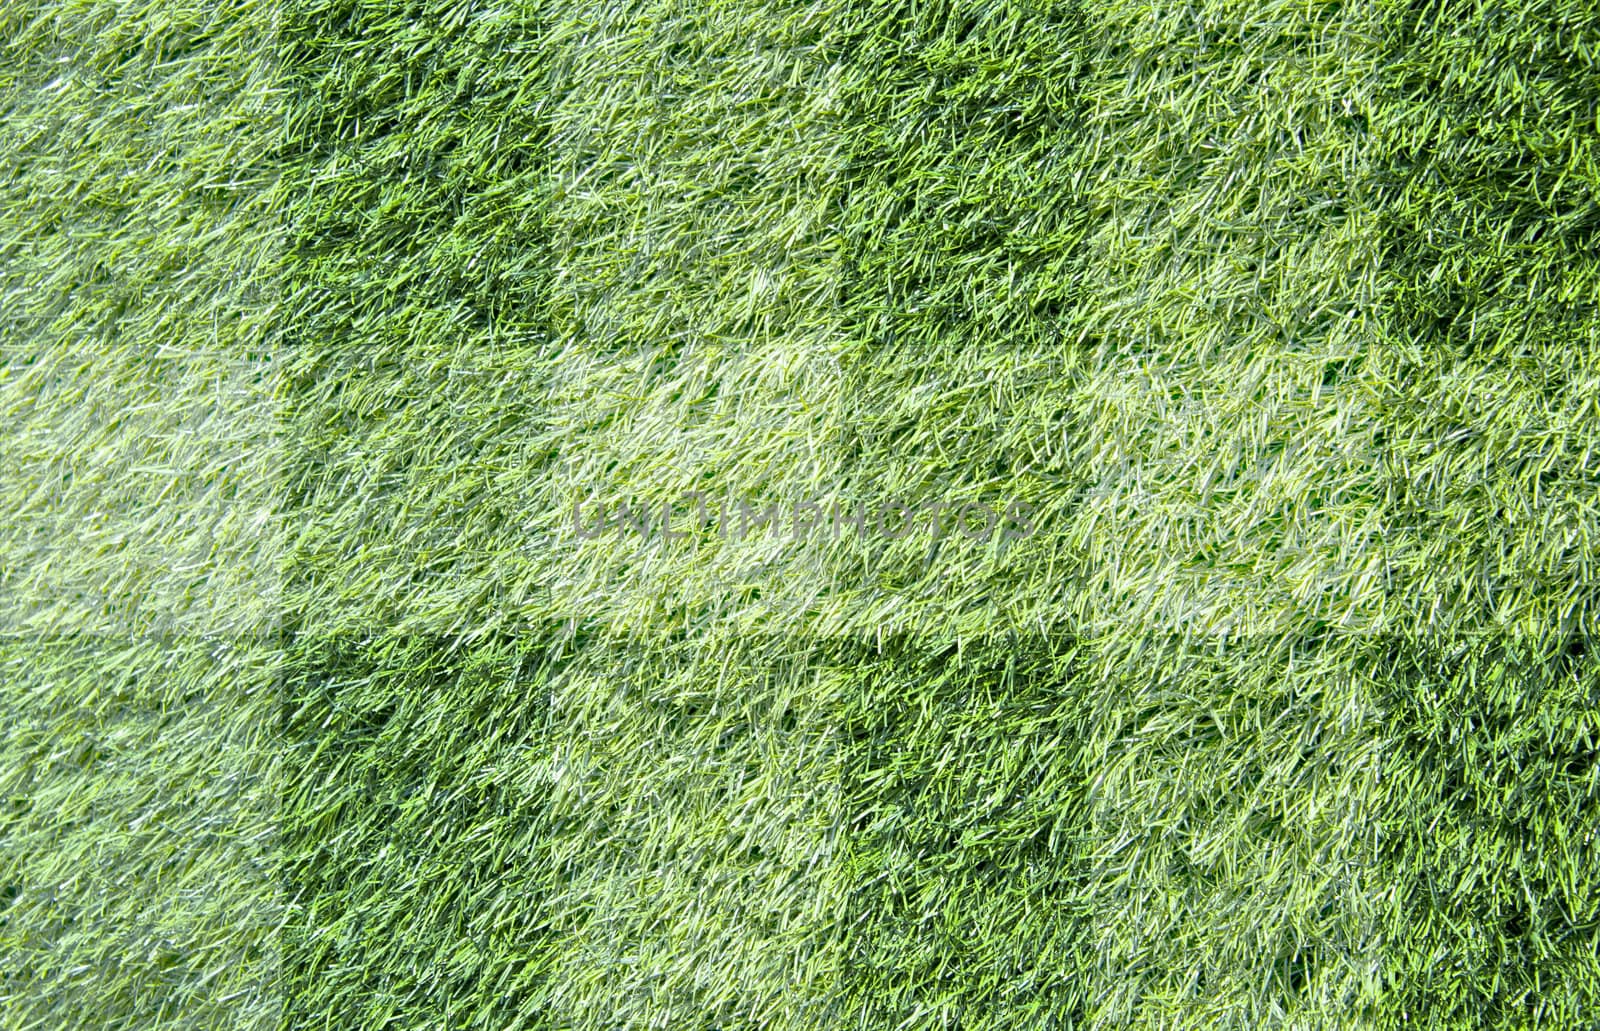 Grass for background ,texture and patten 